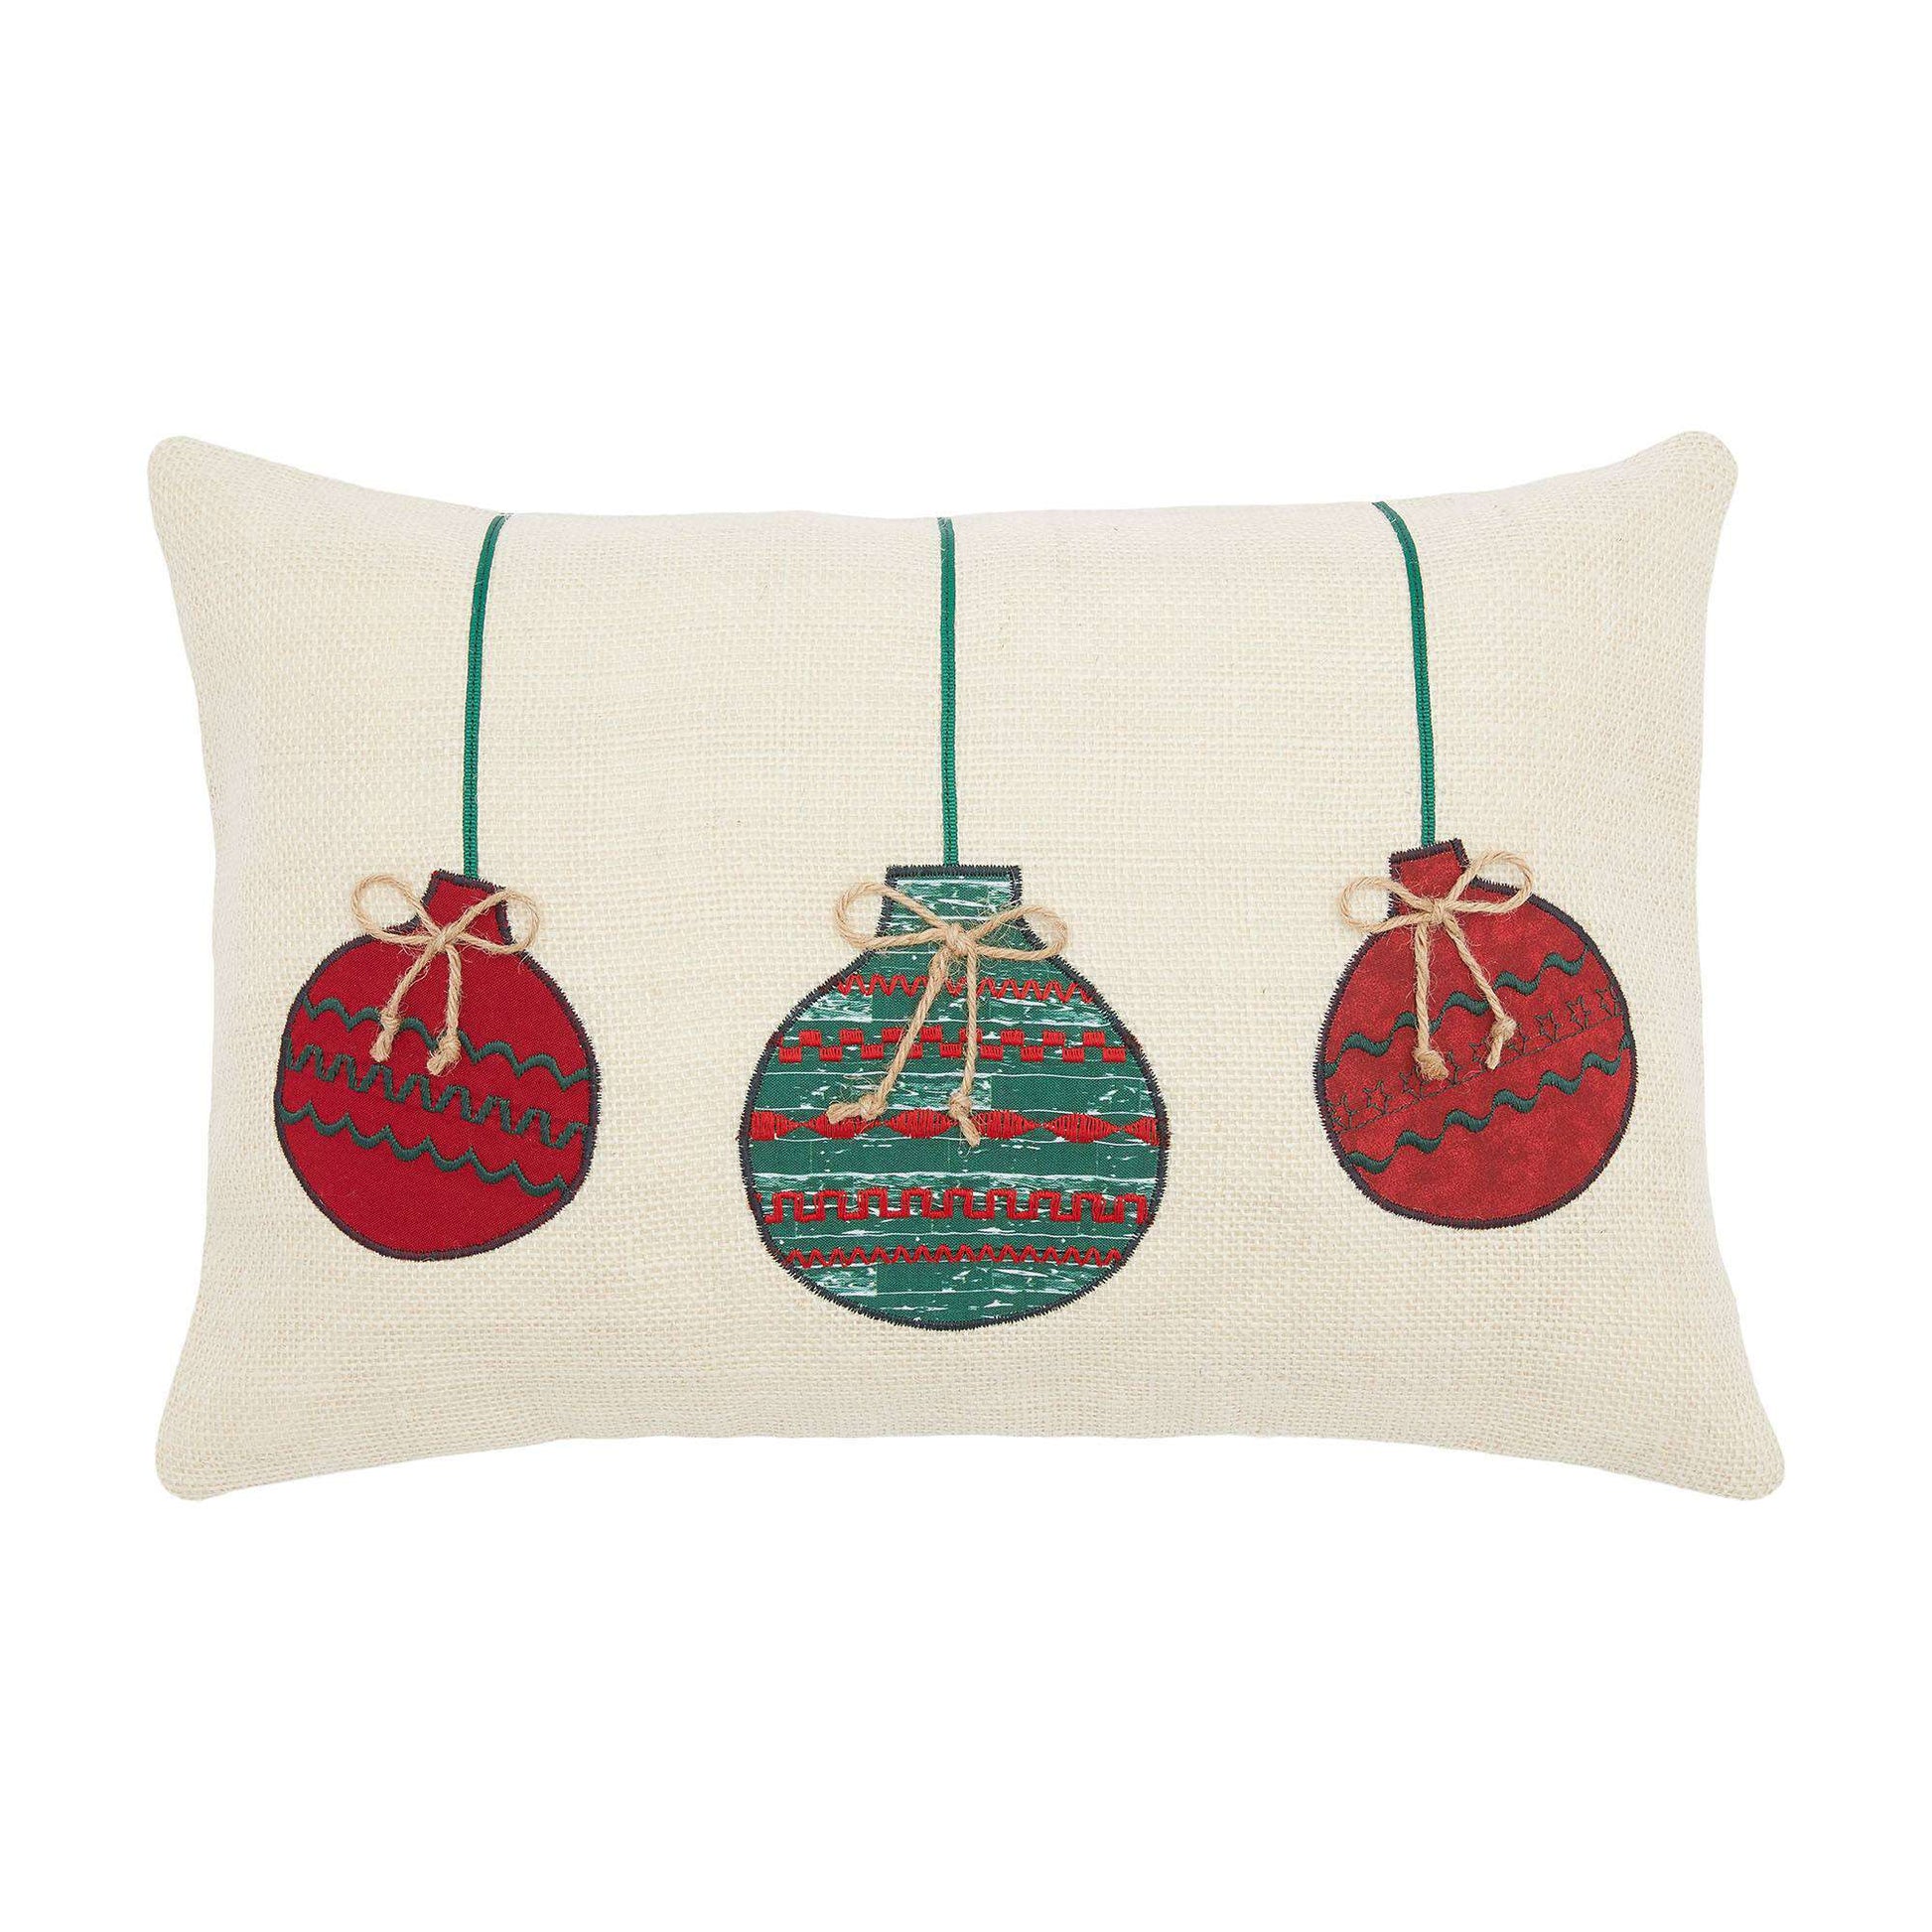 Free Coats & Clark Sewing Ornament Trio Pillow Pattern